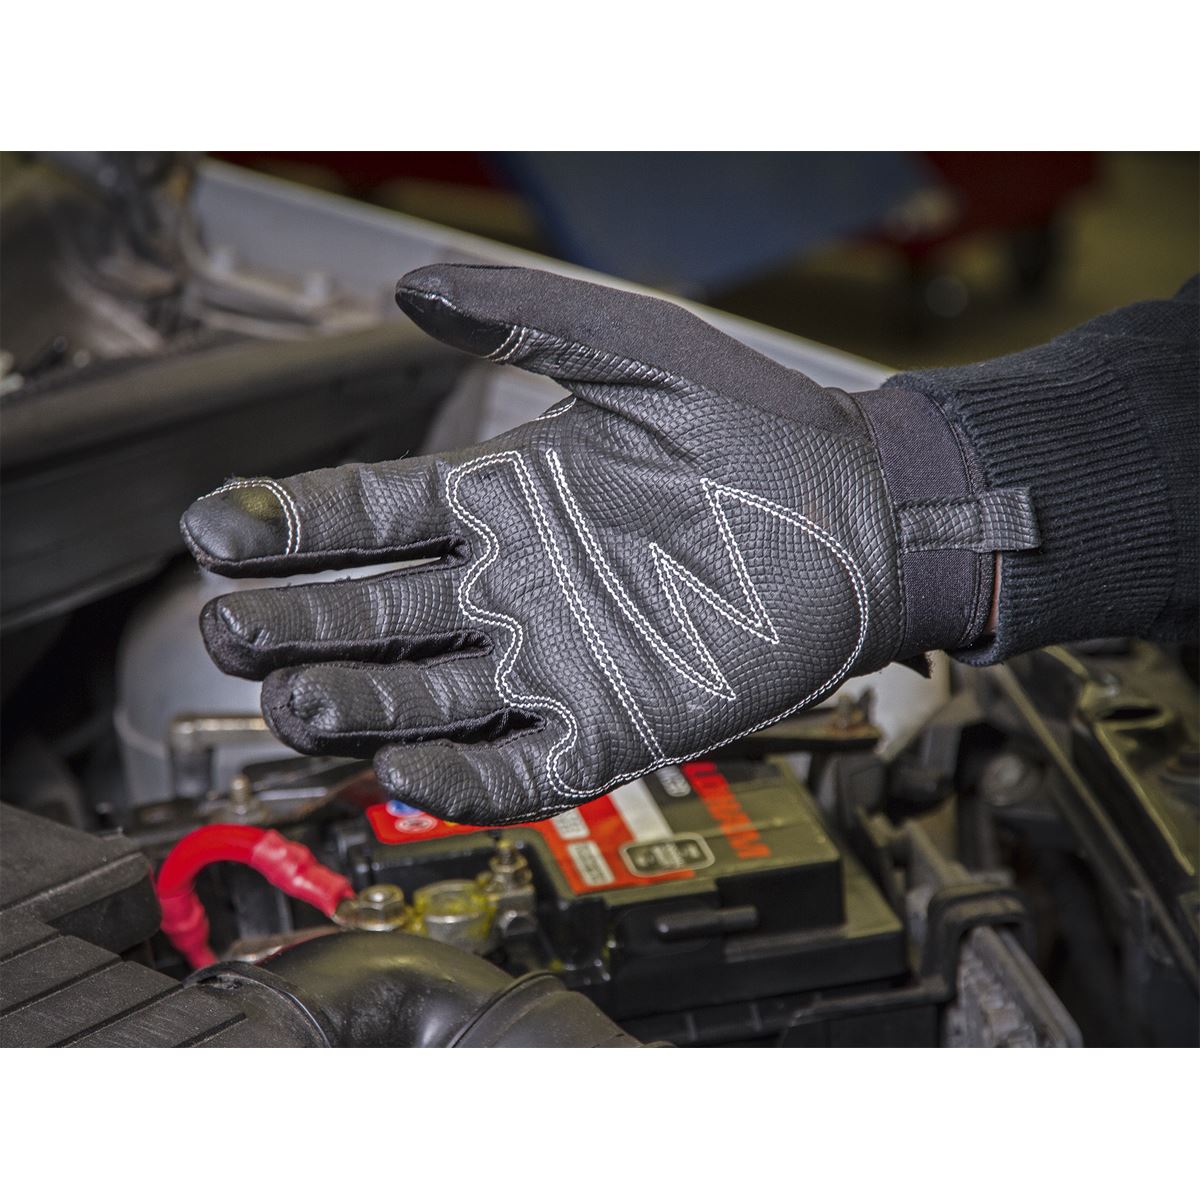 Sealey Mechanic's Gloves Light Palm Tactouch - Large